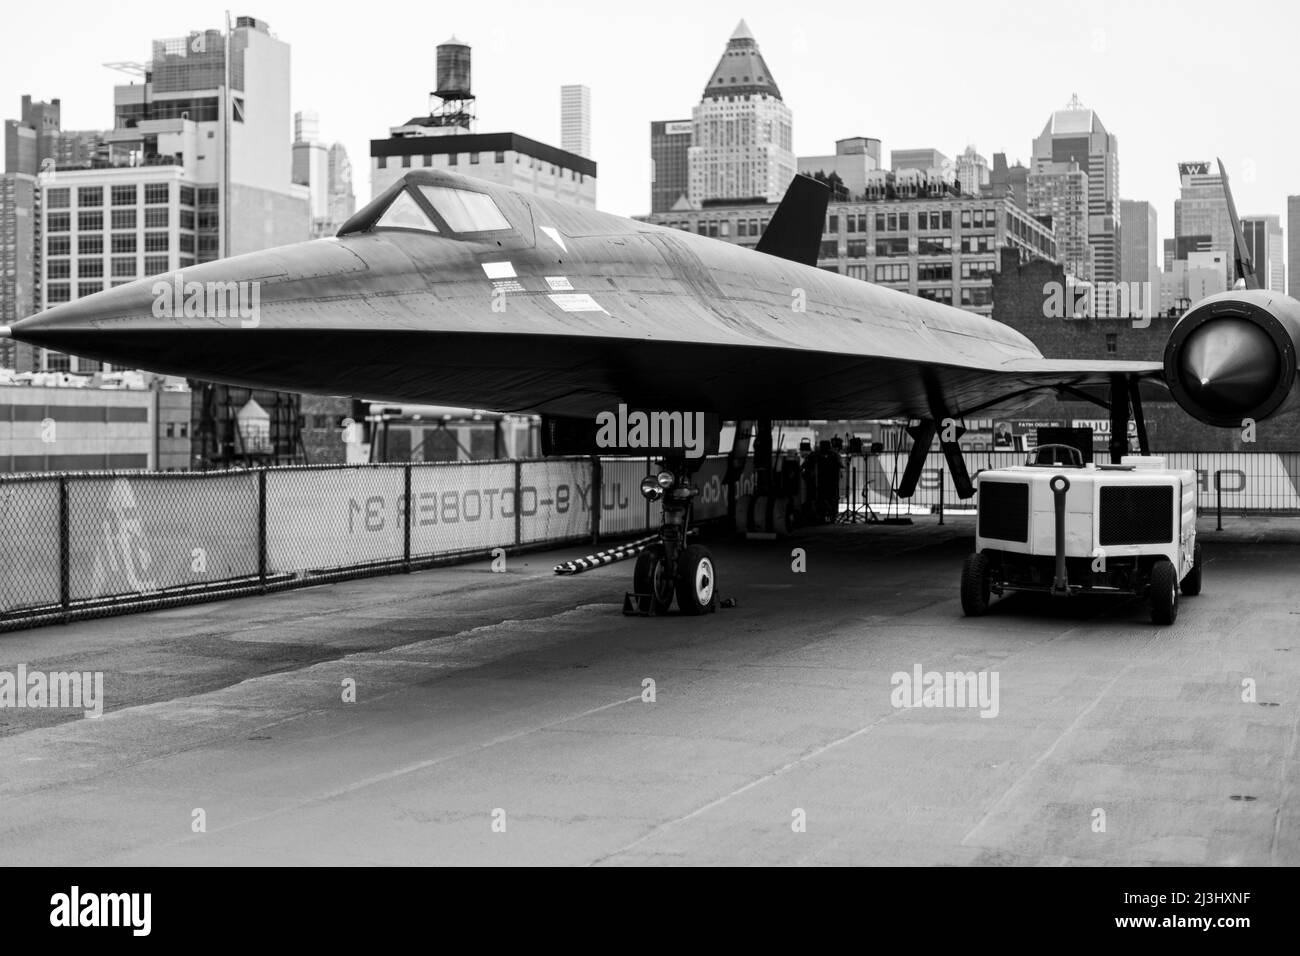 12 AV/W 46 ST, New York City, NY, USA, Lockheed A-12, Project Oxcart 'Blackbird', 1976 at the Intrepid Sea, Air & Space Museum - an american military and maritime history museum showcases the aircraft carrier USS Intrepid. Stock Photo